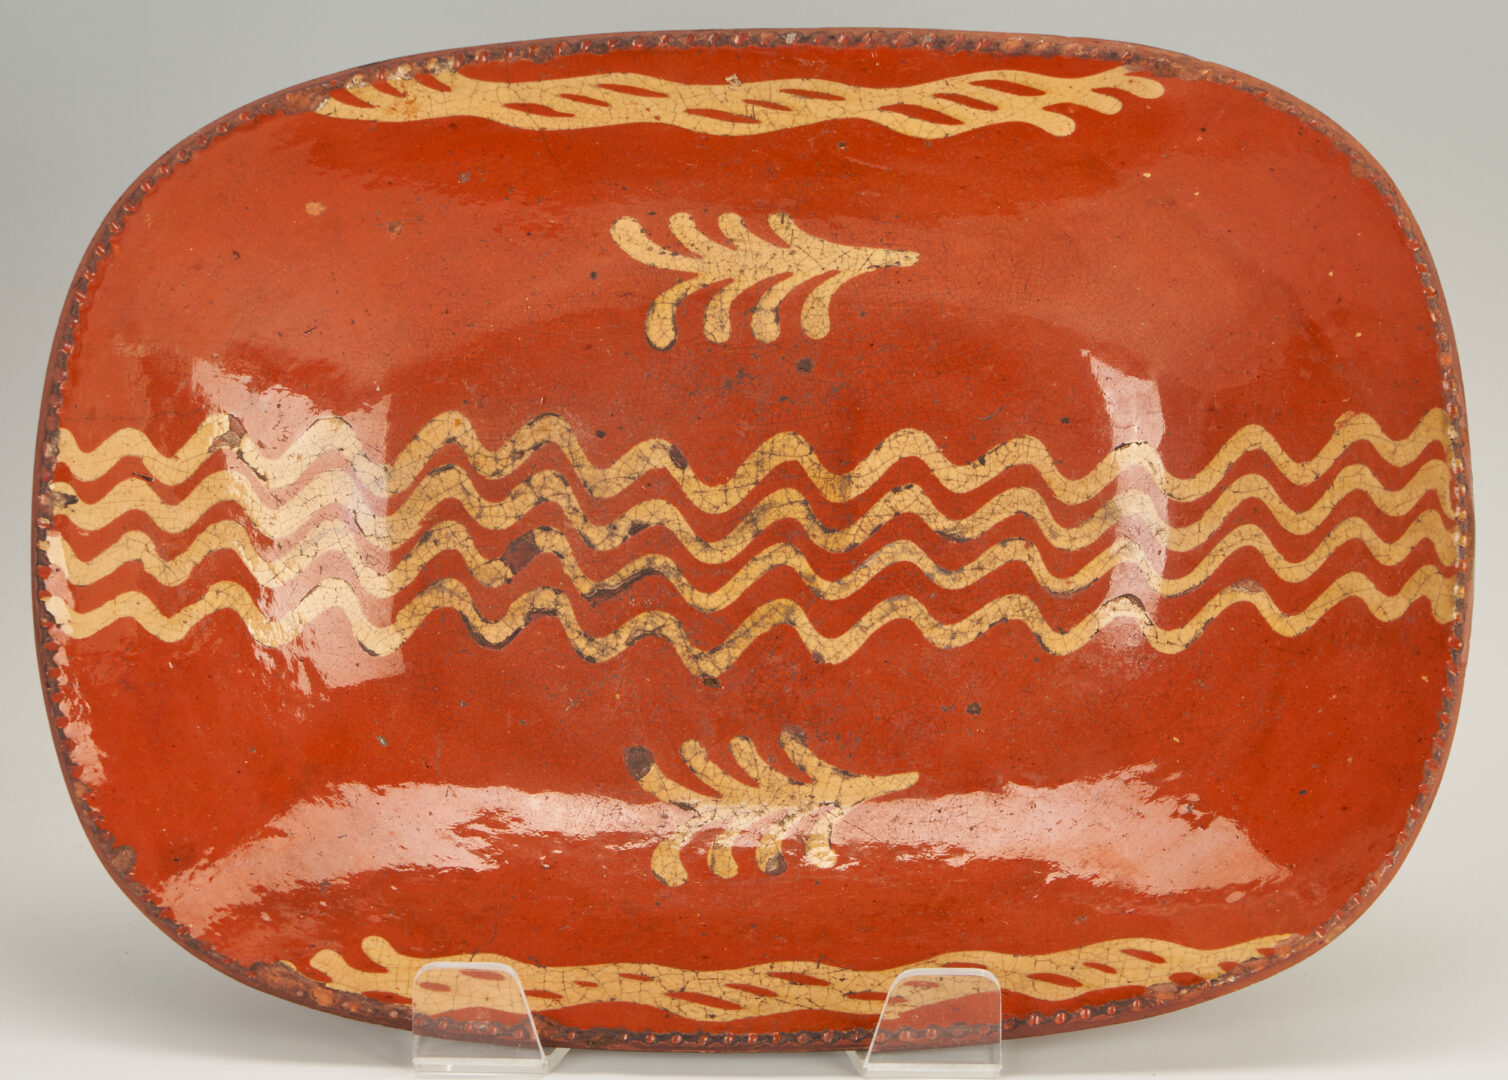 Lot 207: Collection of 7 Slipware Decorated Redware Plates